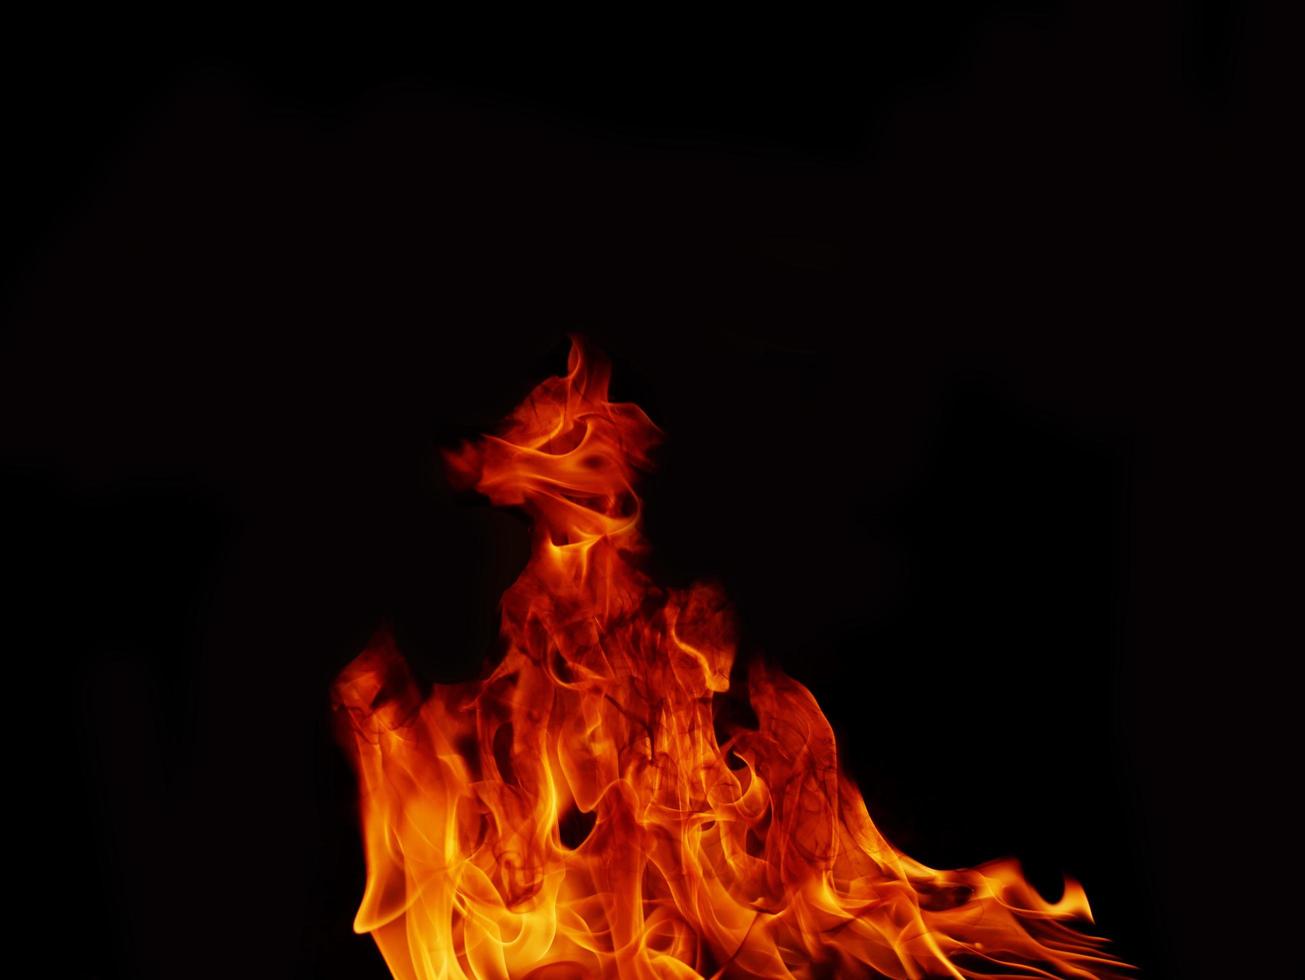 Abstract black flame flame texture, perfect for banners or adver photo